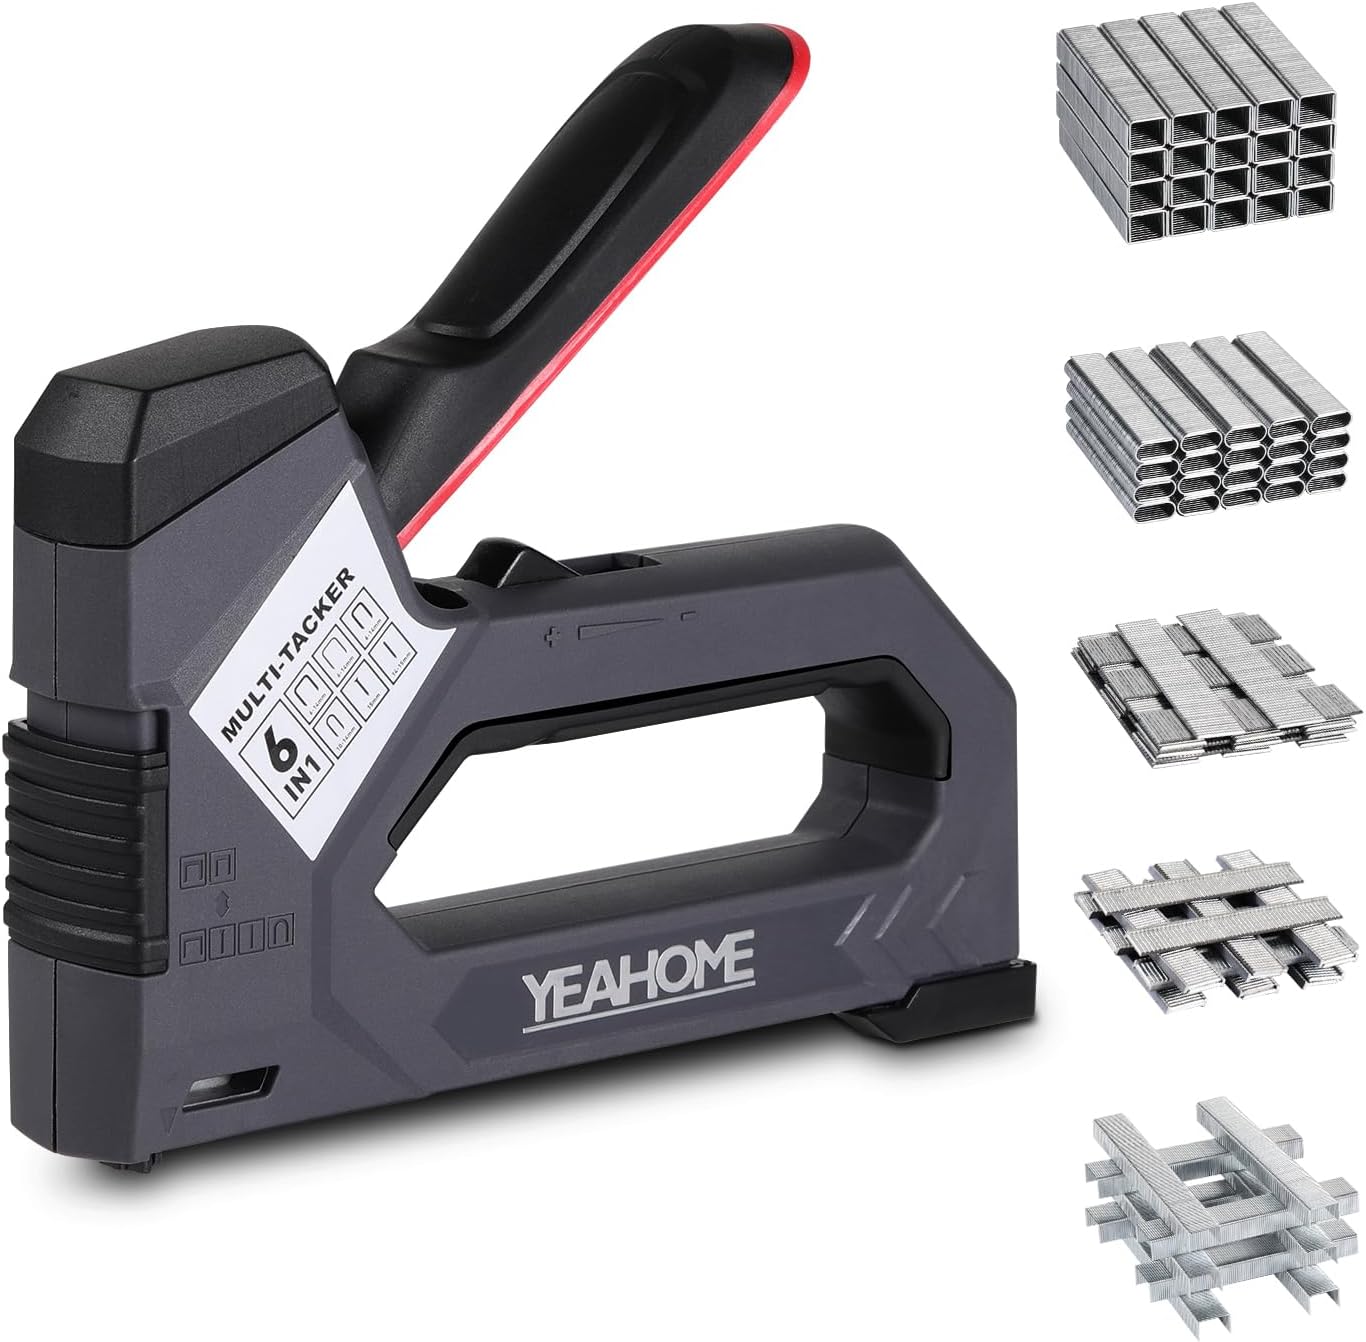 Read more about the article YEAHOME 6-in-1 Staple Gun Heavy Duty for ONLY $17.99 (Was $19.99)